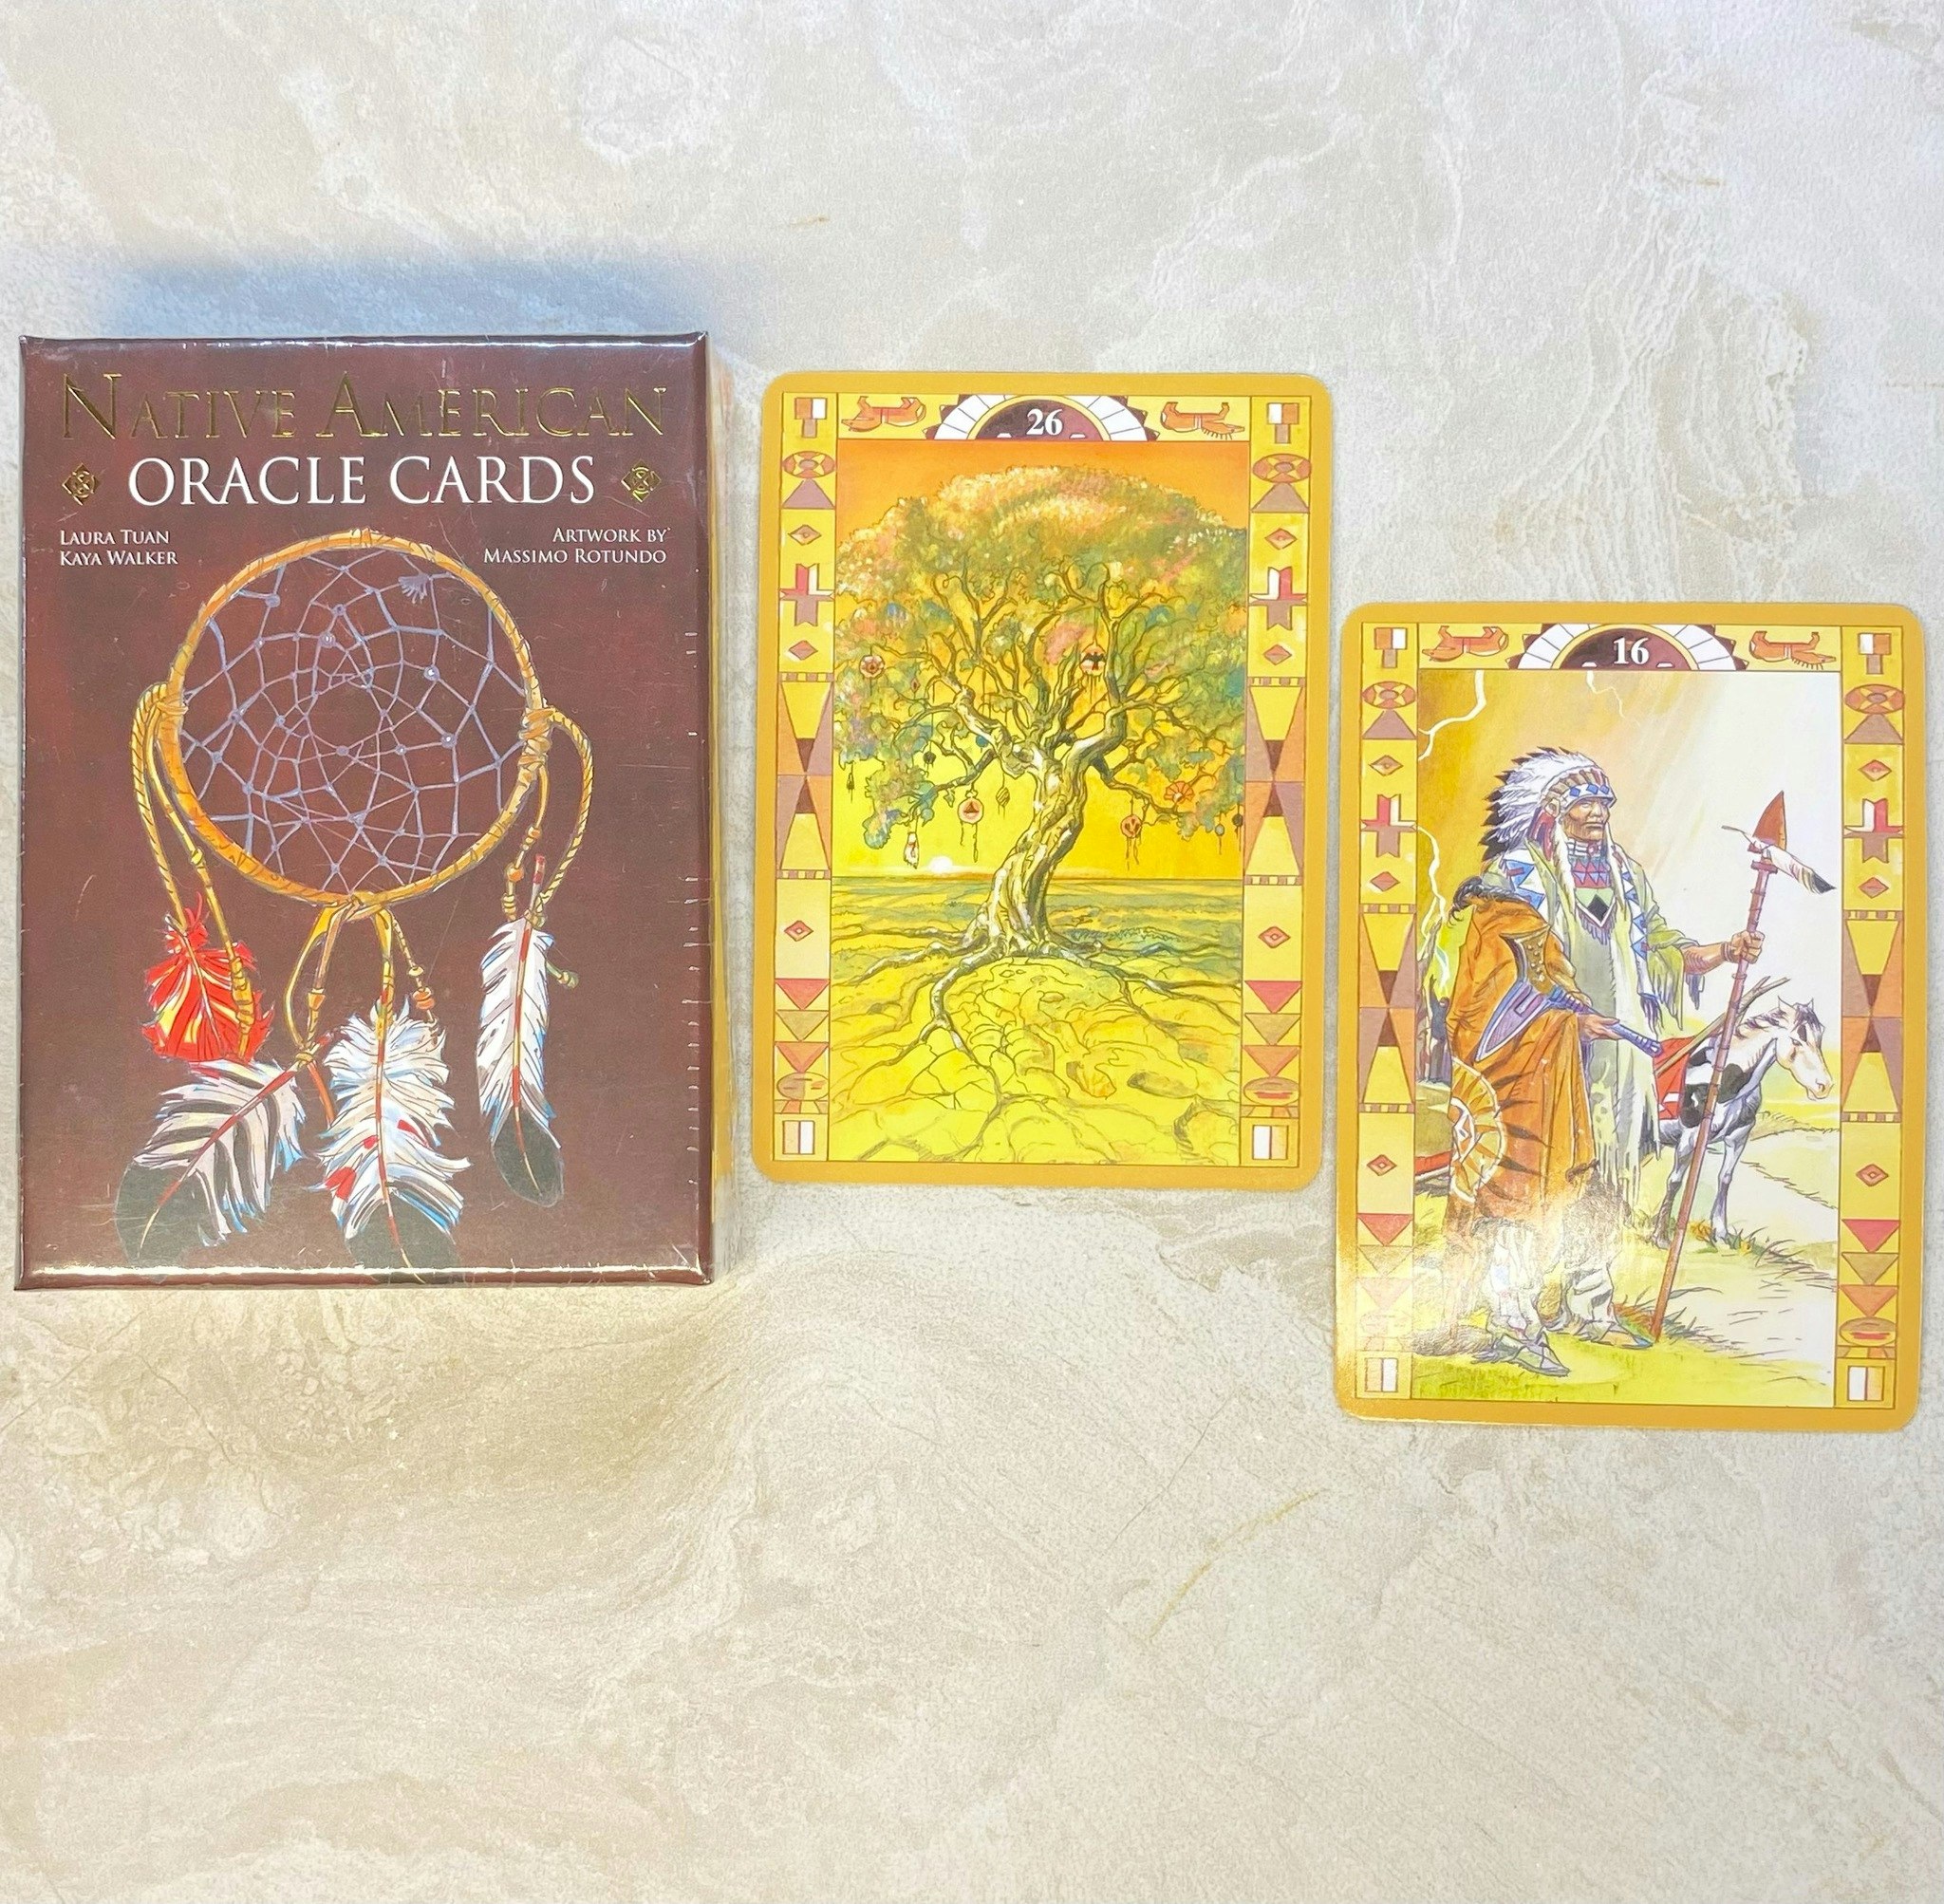 Native American Oracle cards